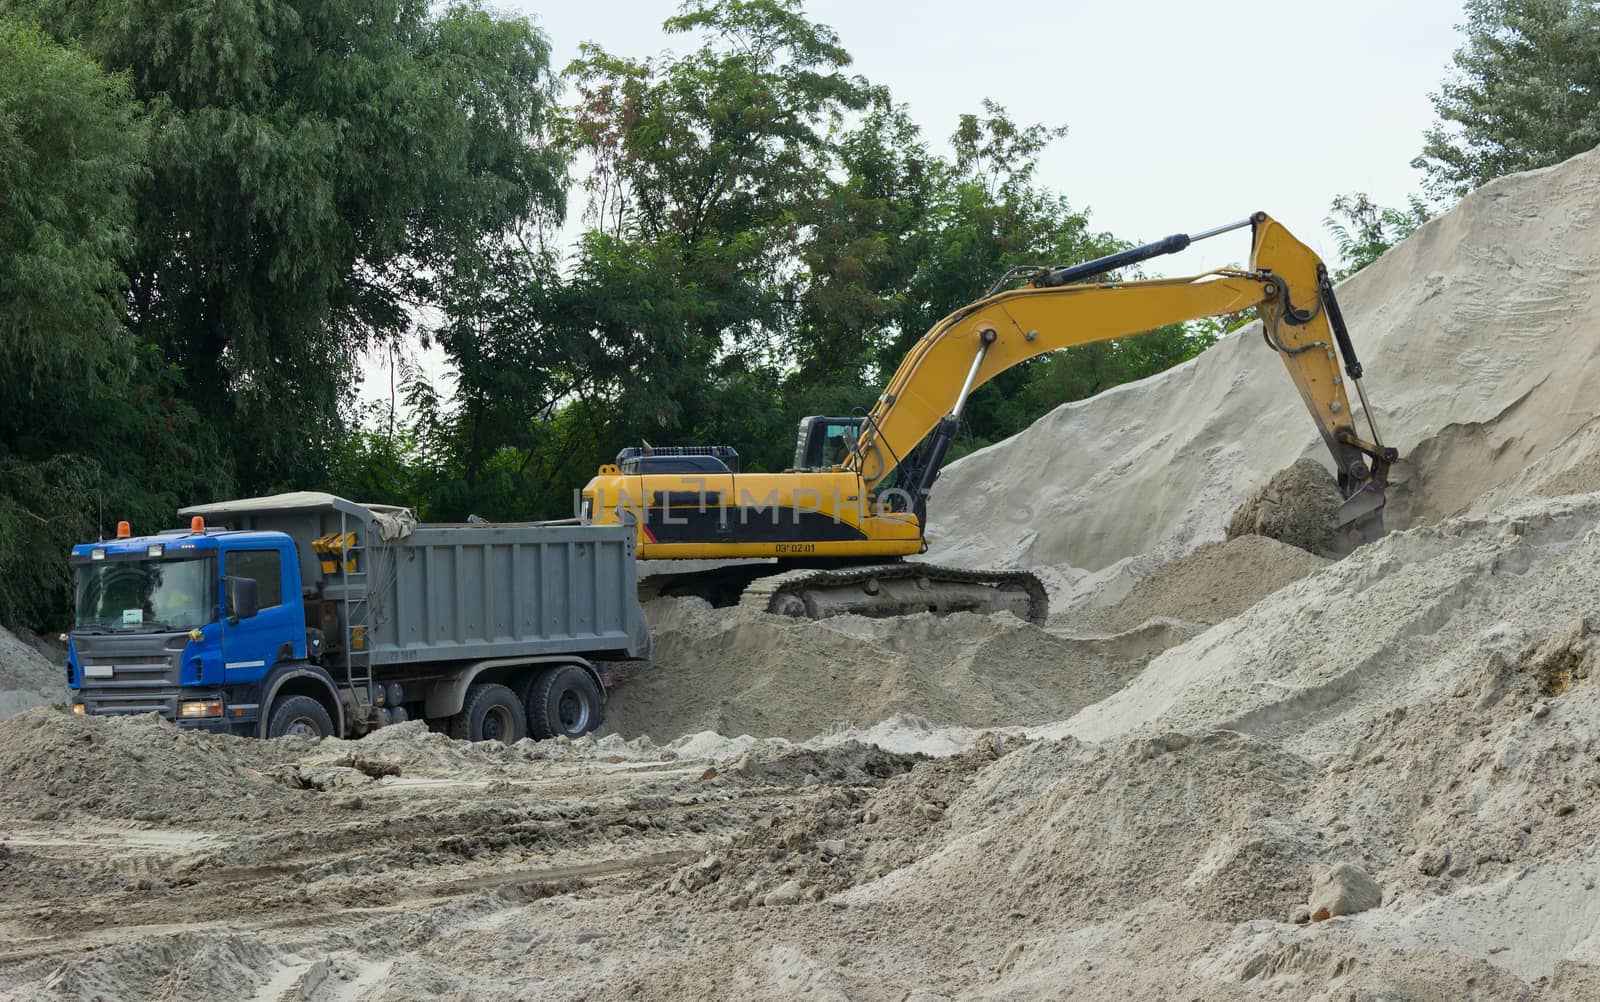 Excavator loads sand into the truck